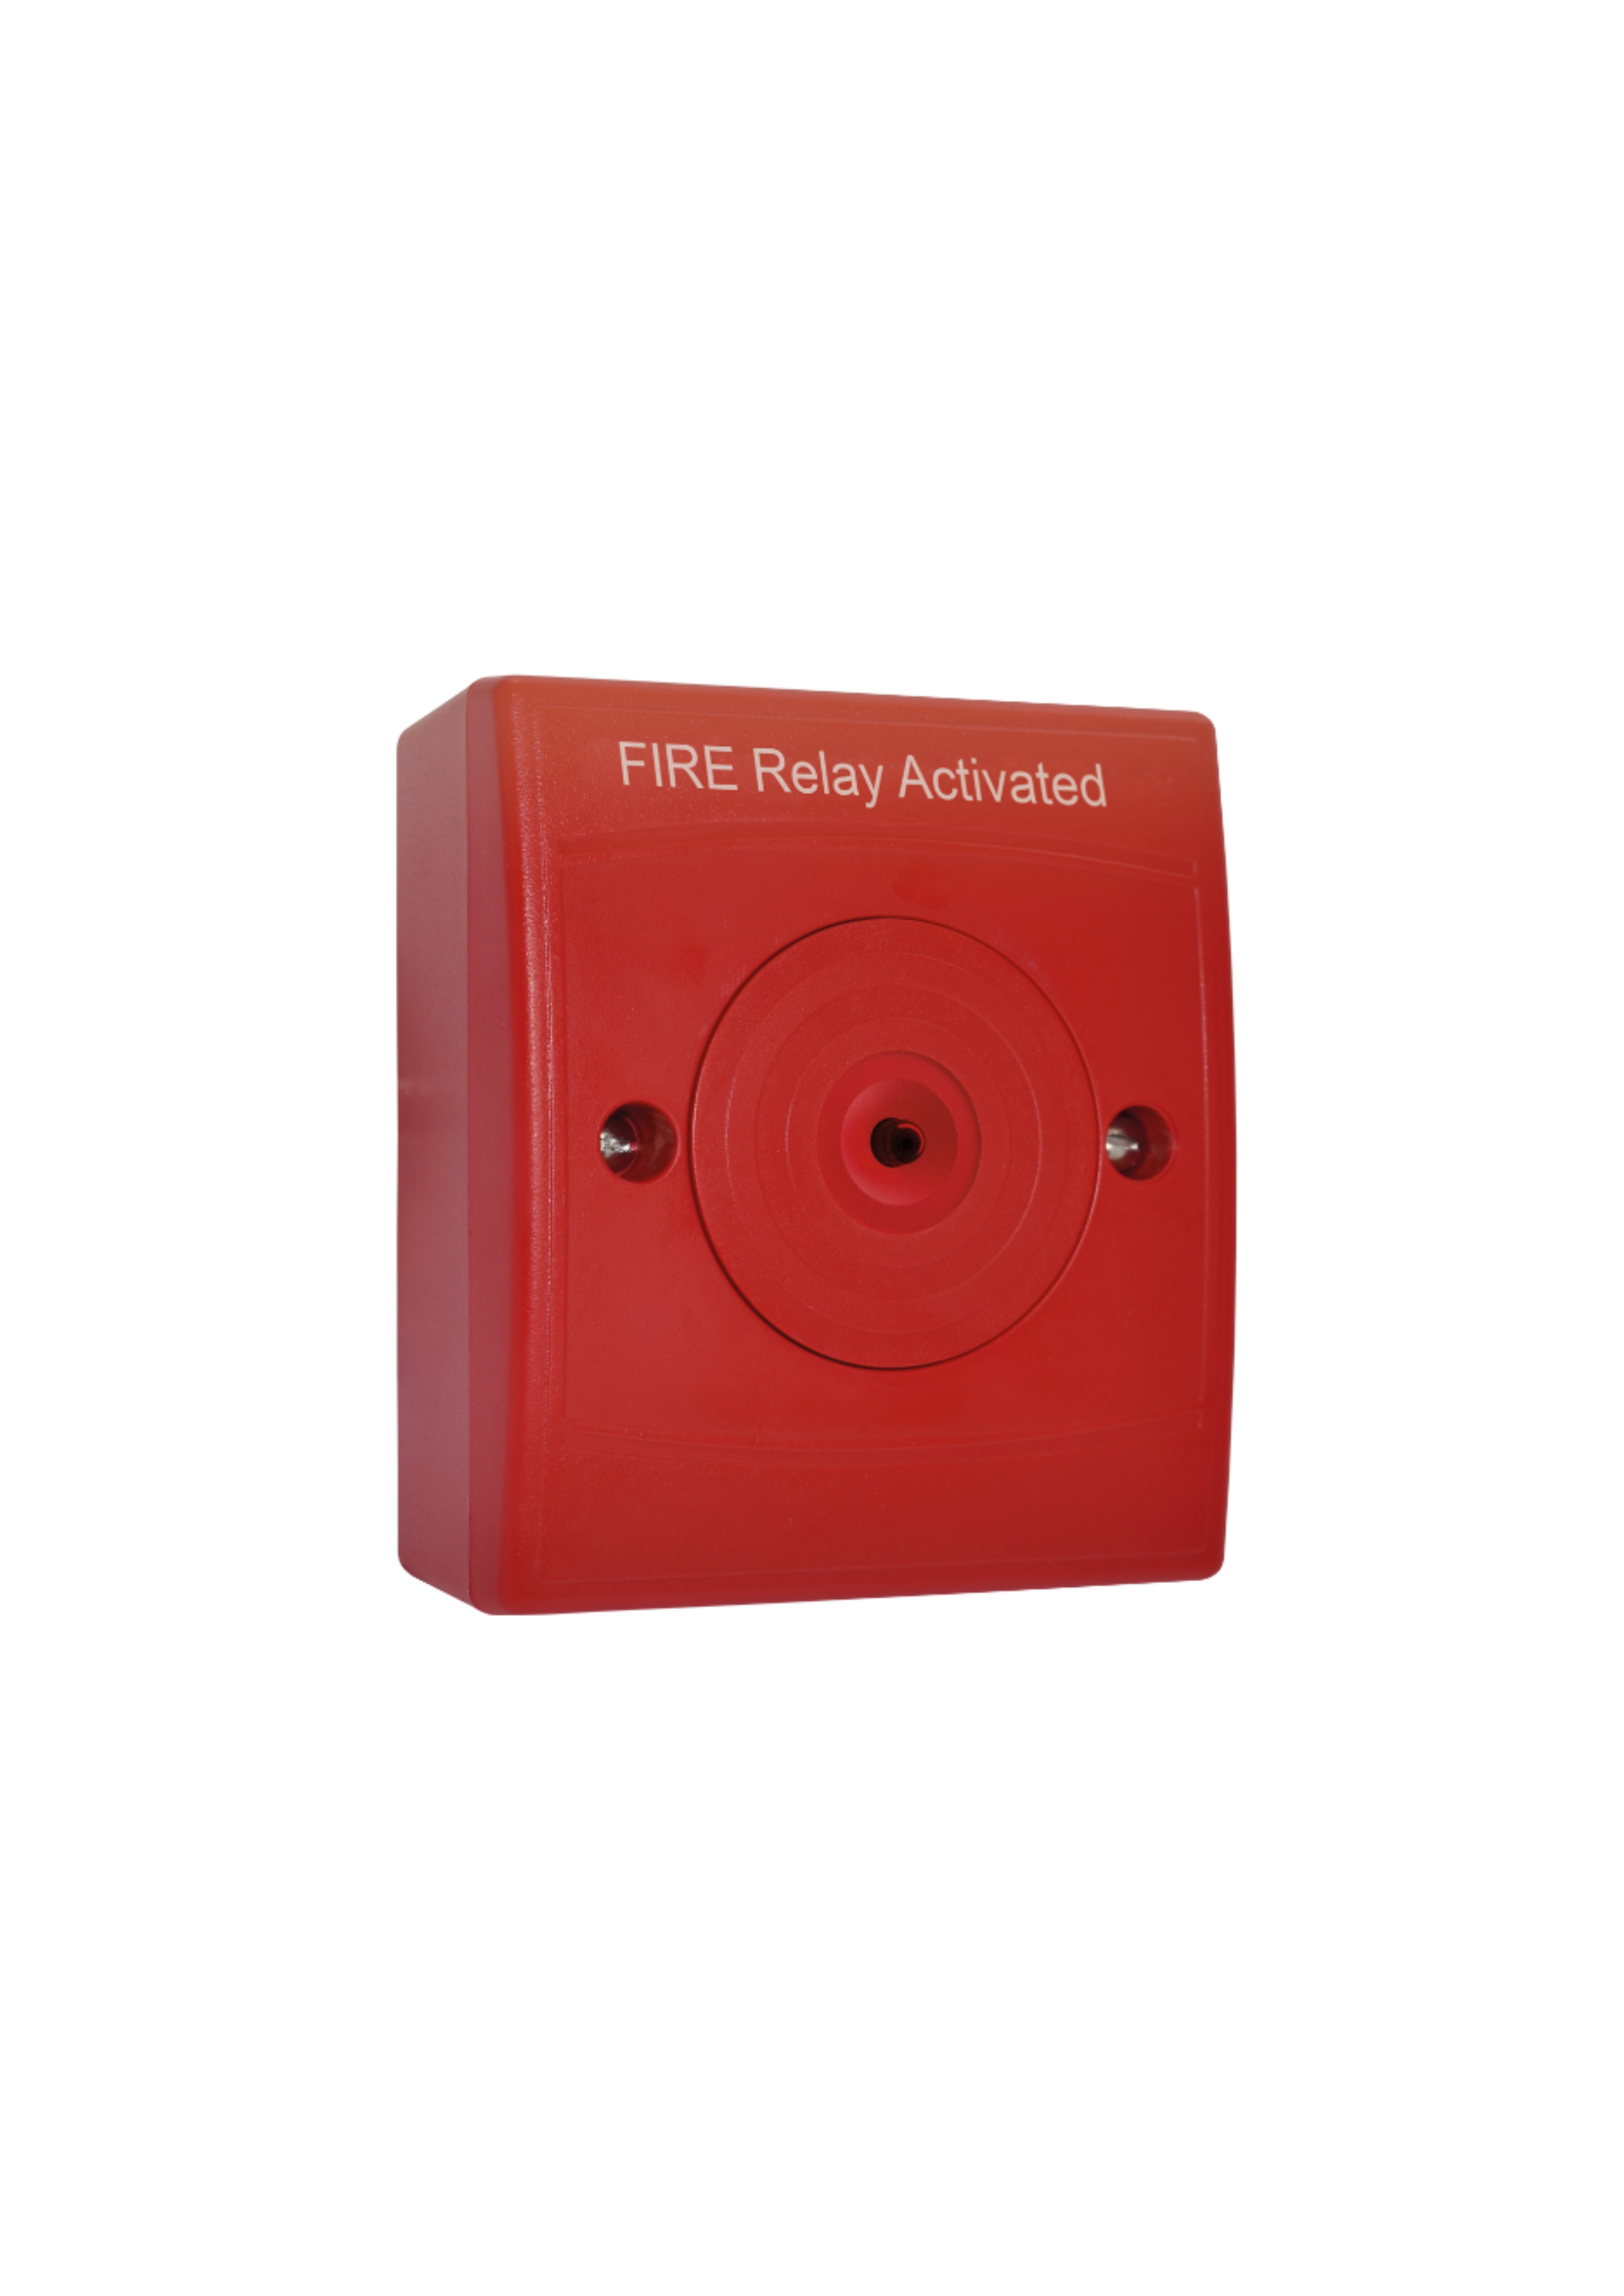 Identifire Auxiliary Relay Flush Fit, White Case 1...